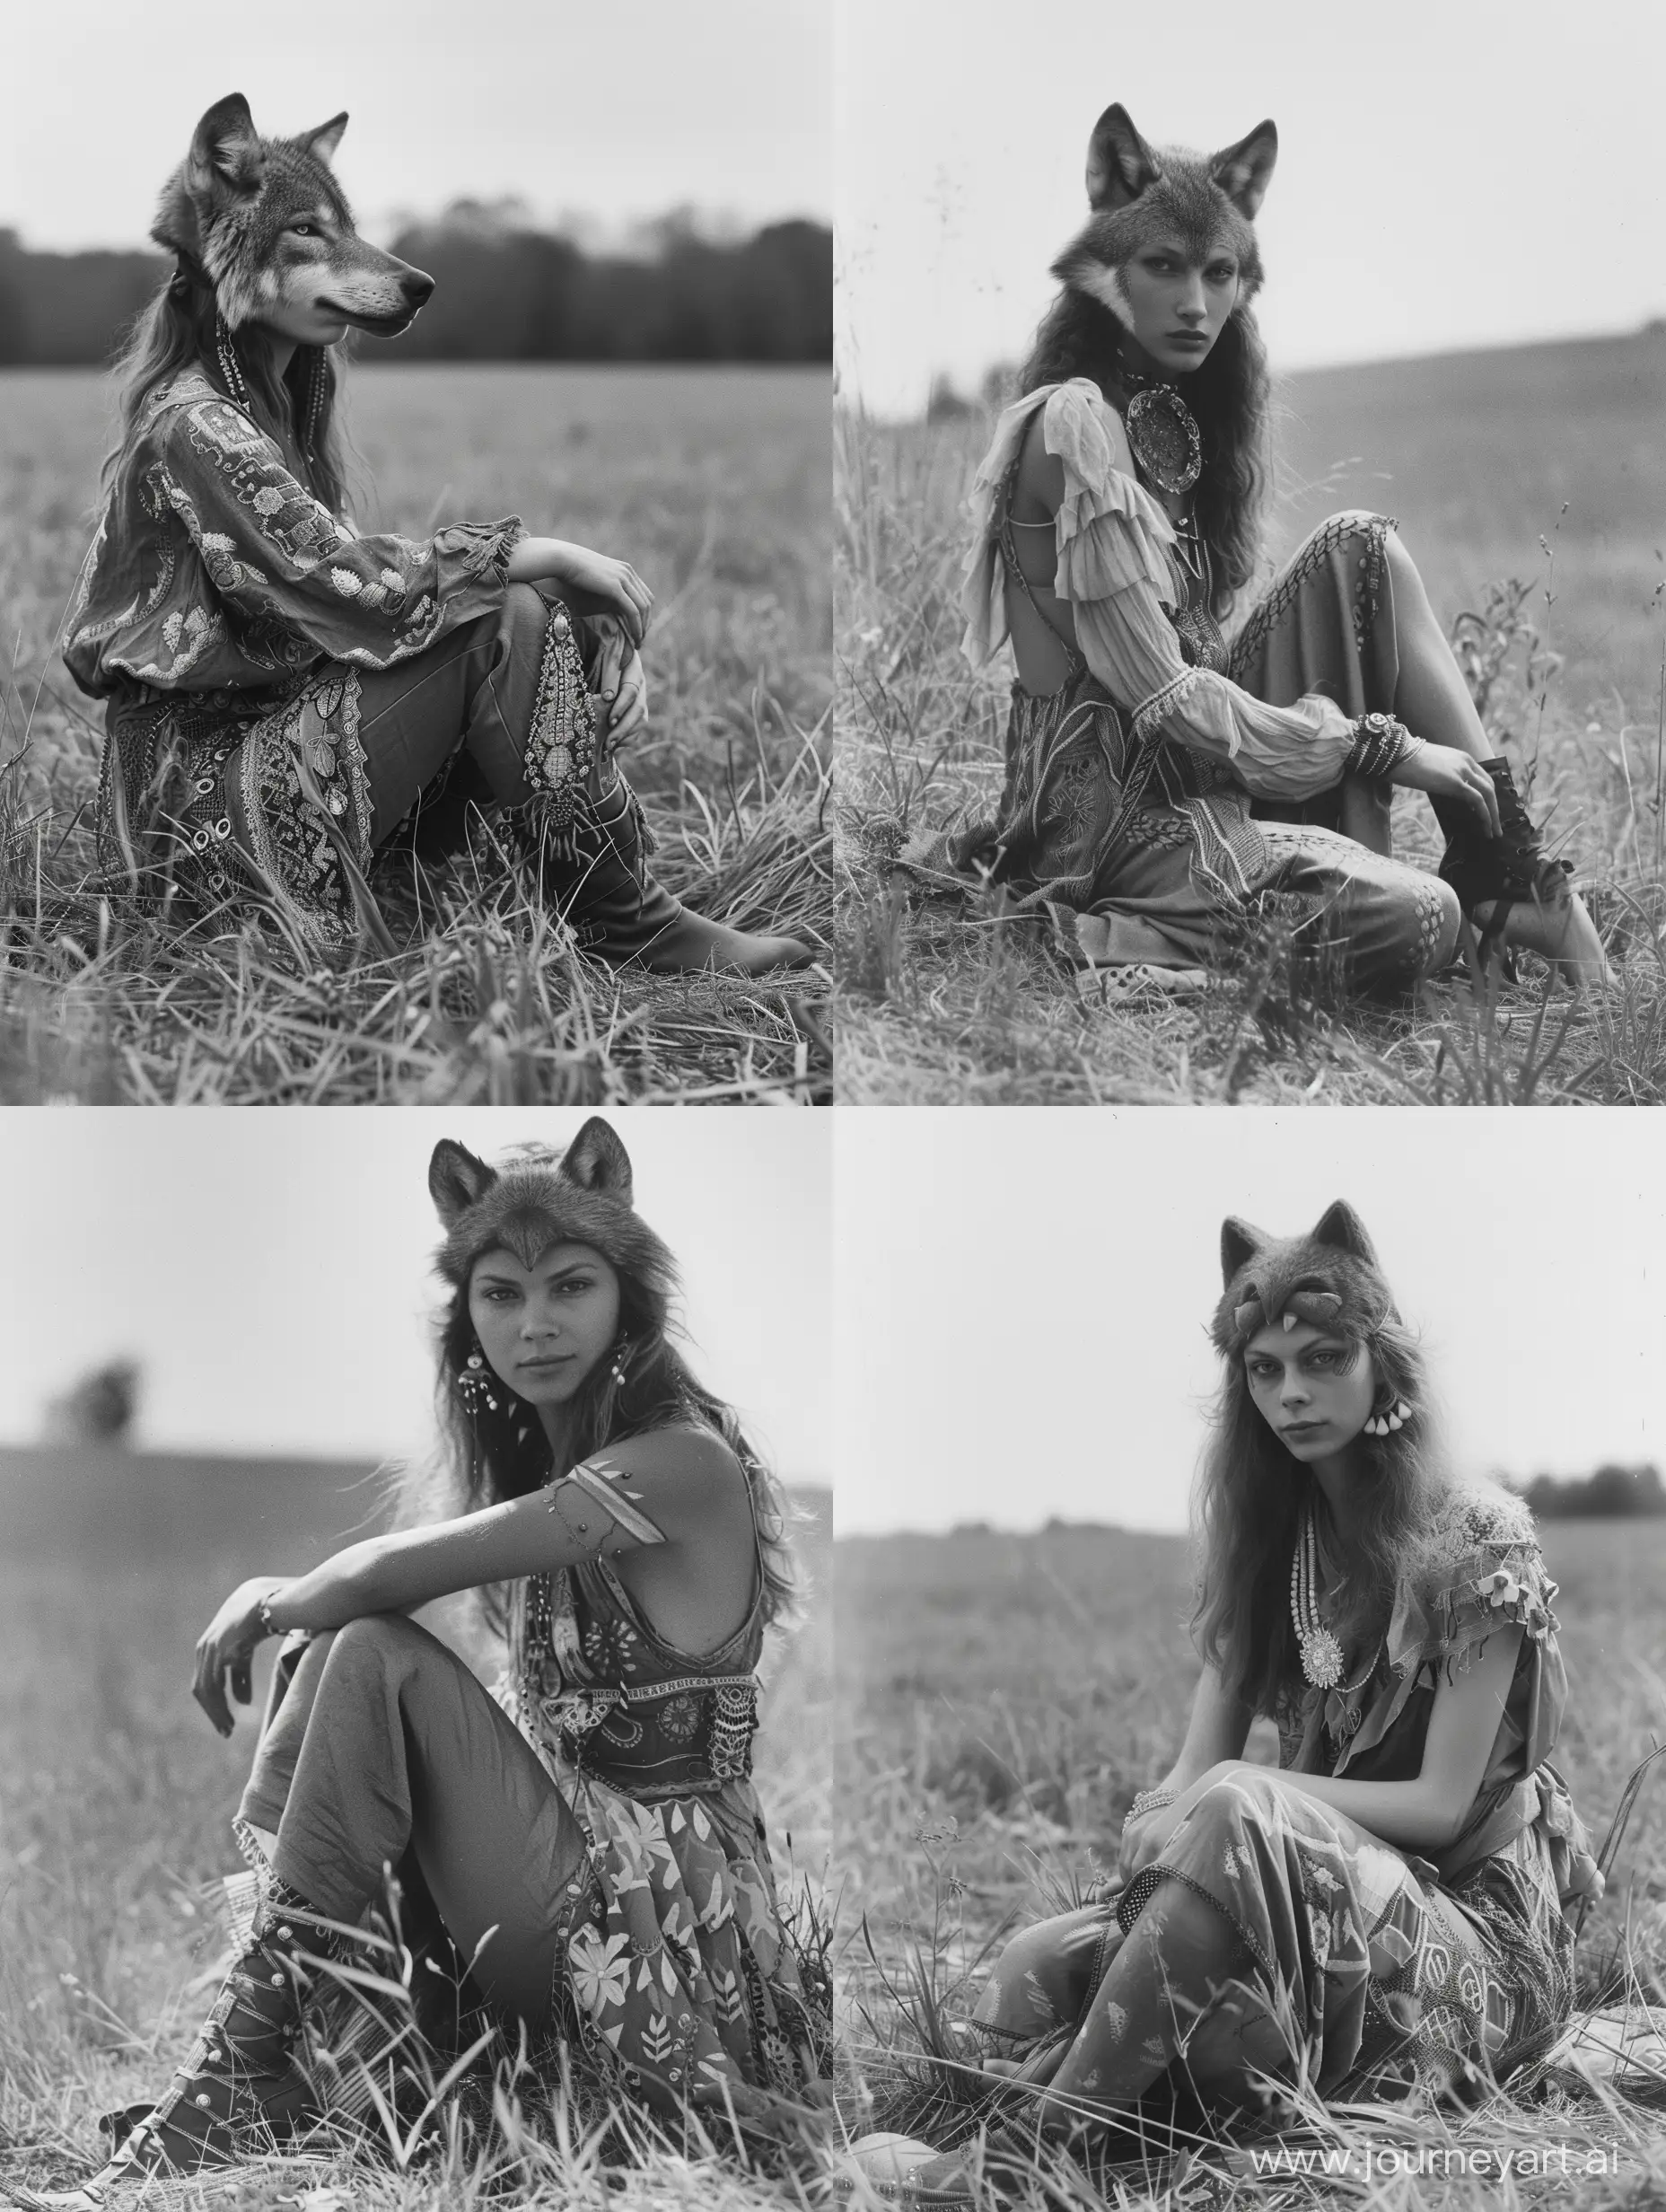 A woman who has a wolf’s head and human body sitting in a field, wearing boho style clothes, looking at the viewer, grayscale, 1970’s, taken on provia